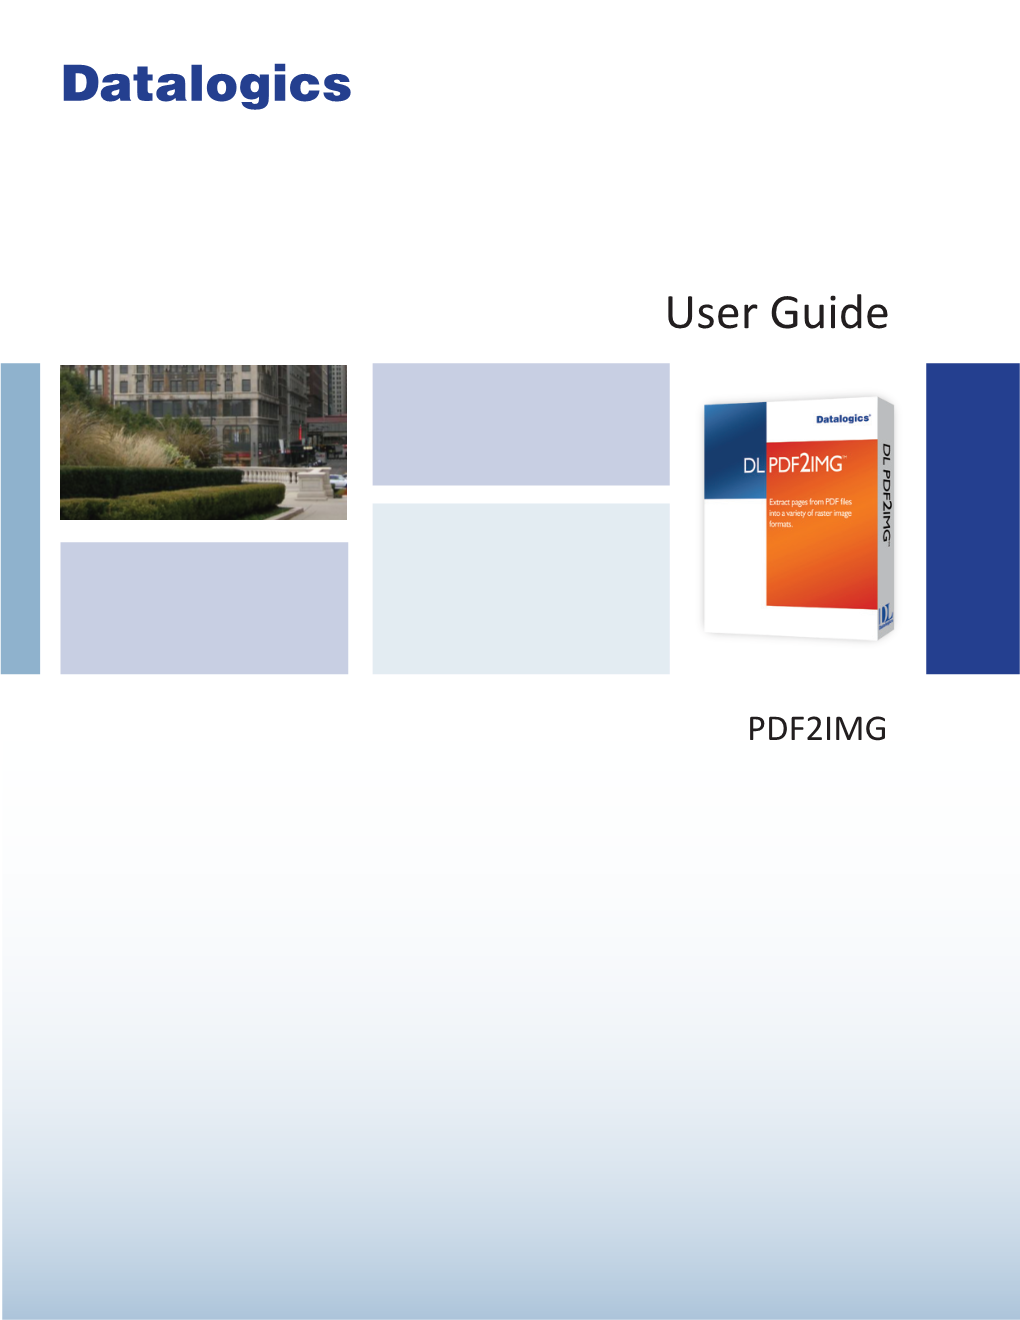 PDF2IMG User Guide This Guide Is Part of the PDF2IMG V2.4 Suite; 11/17/2014